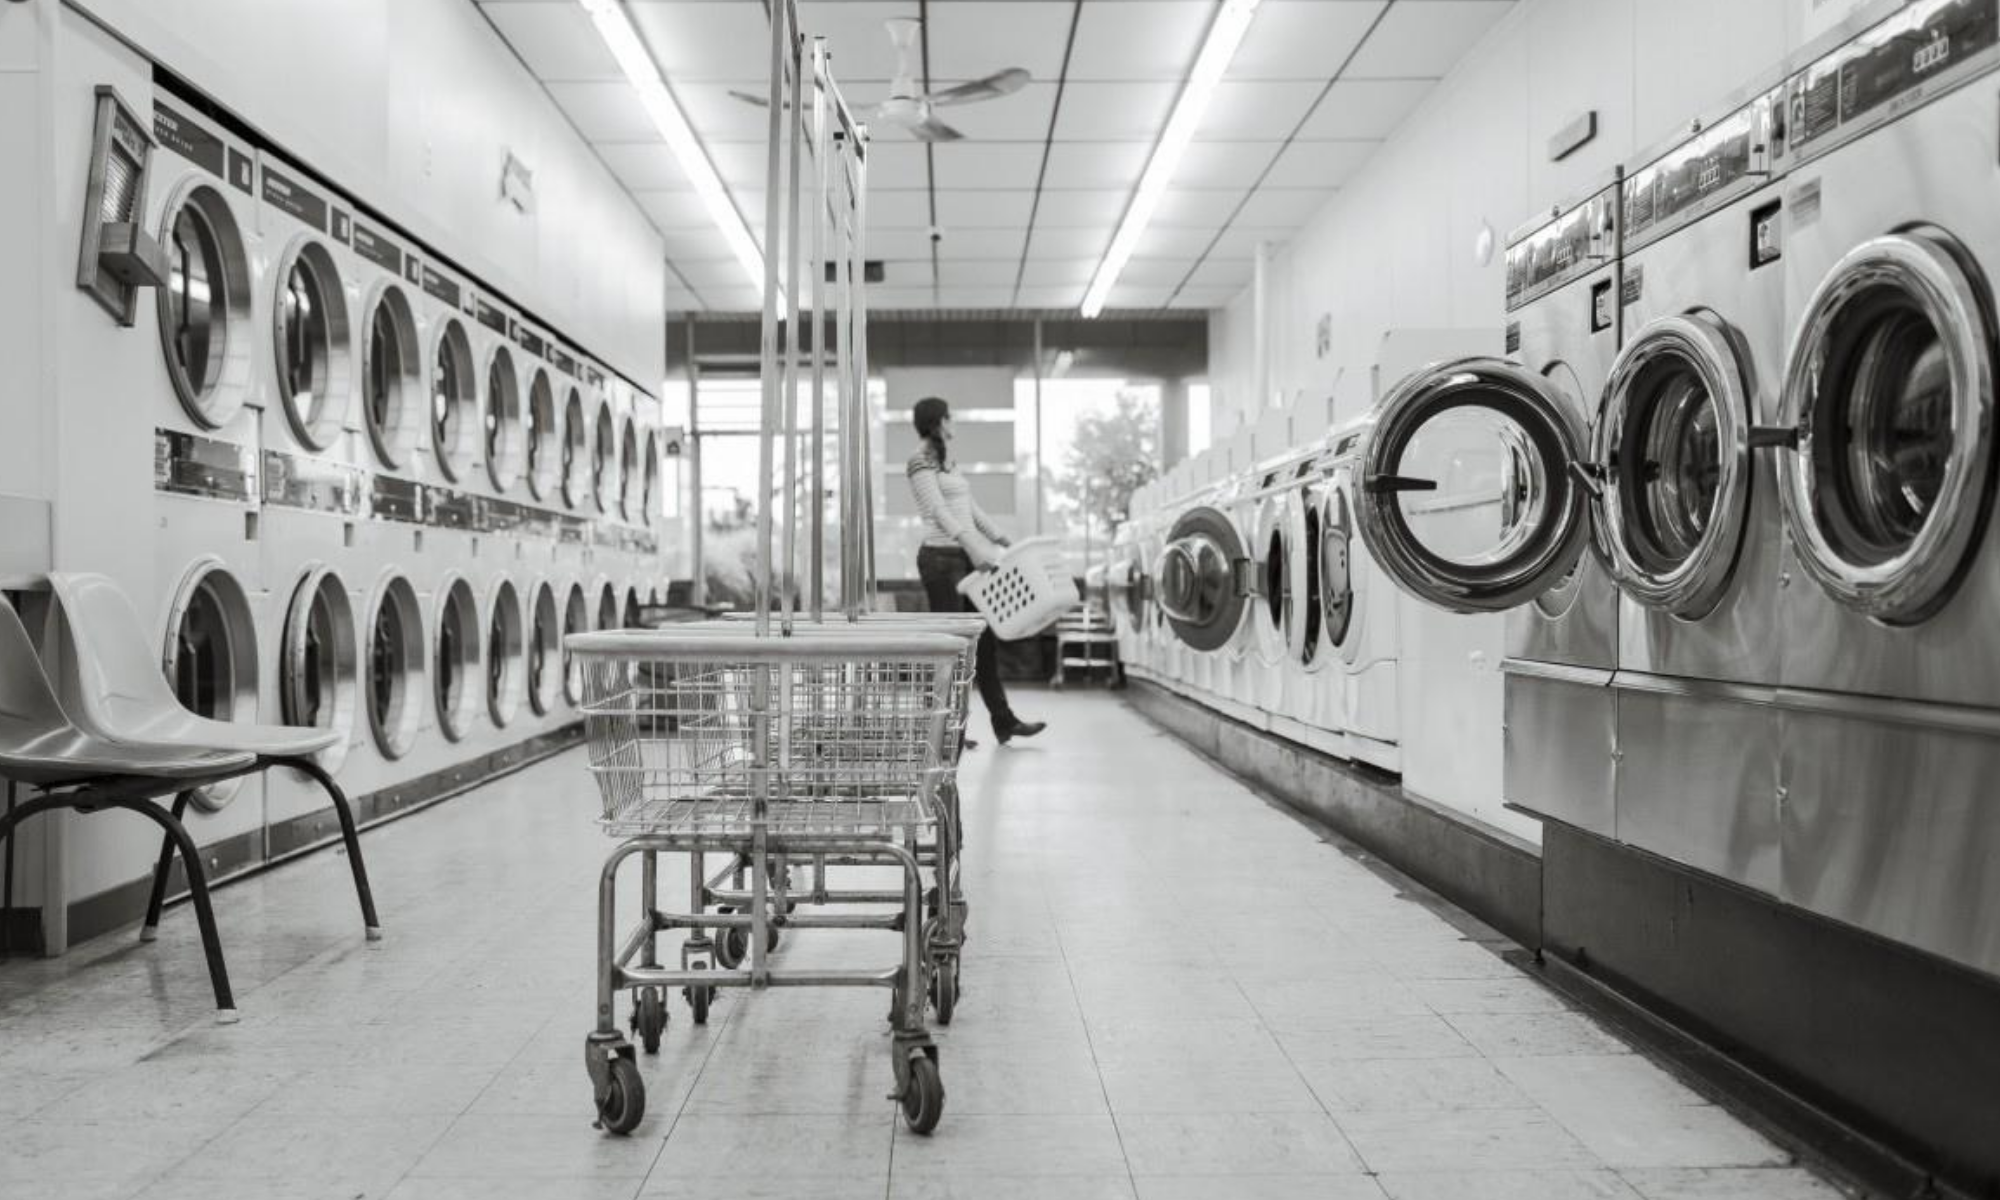 Find a Laundromat Near You